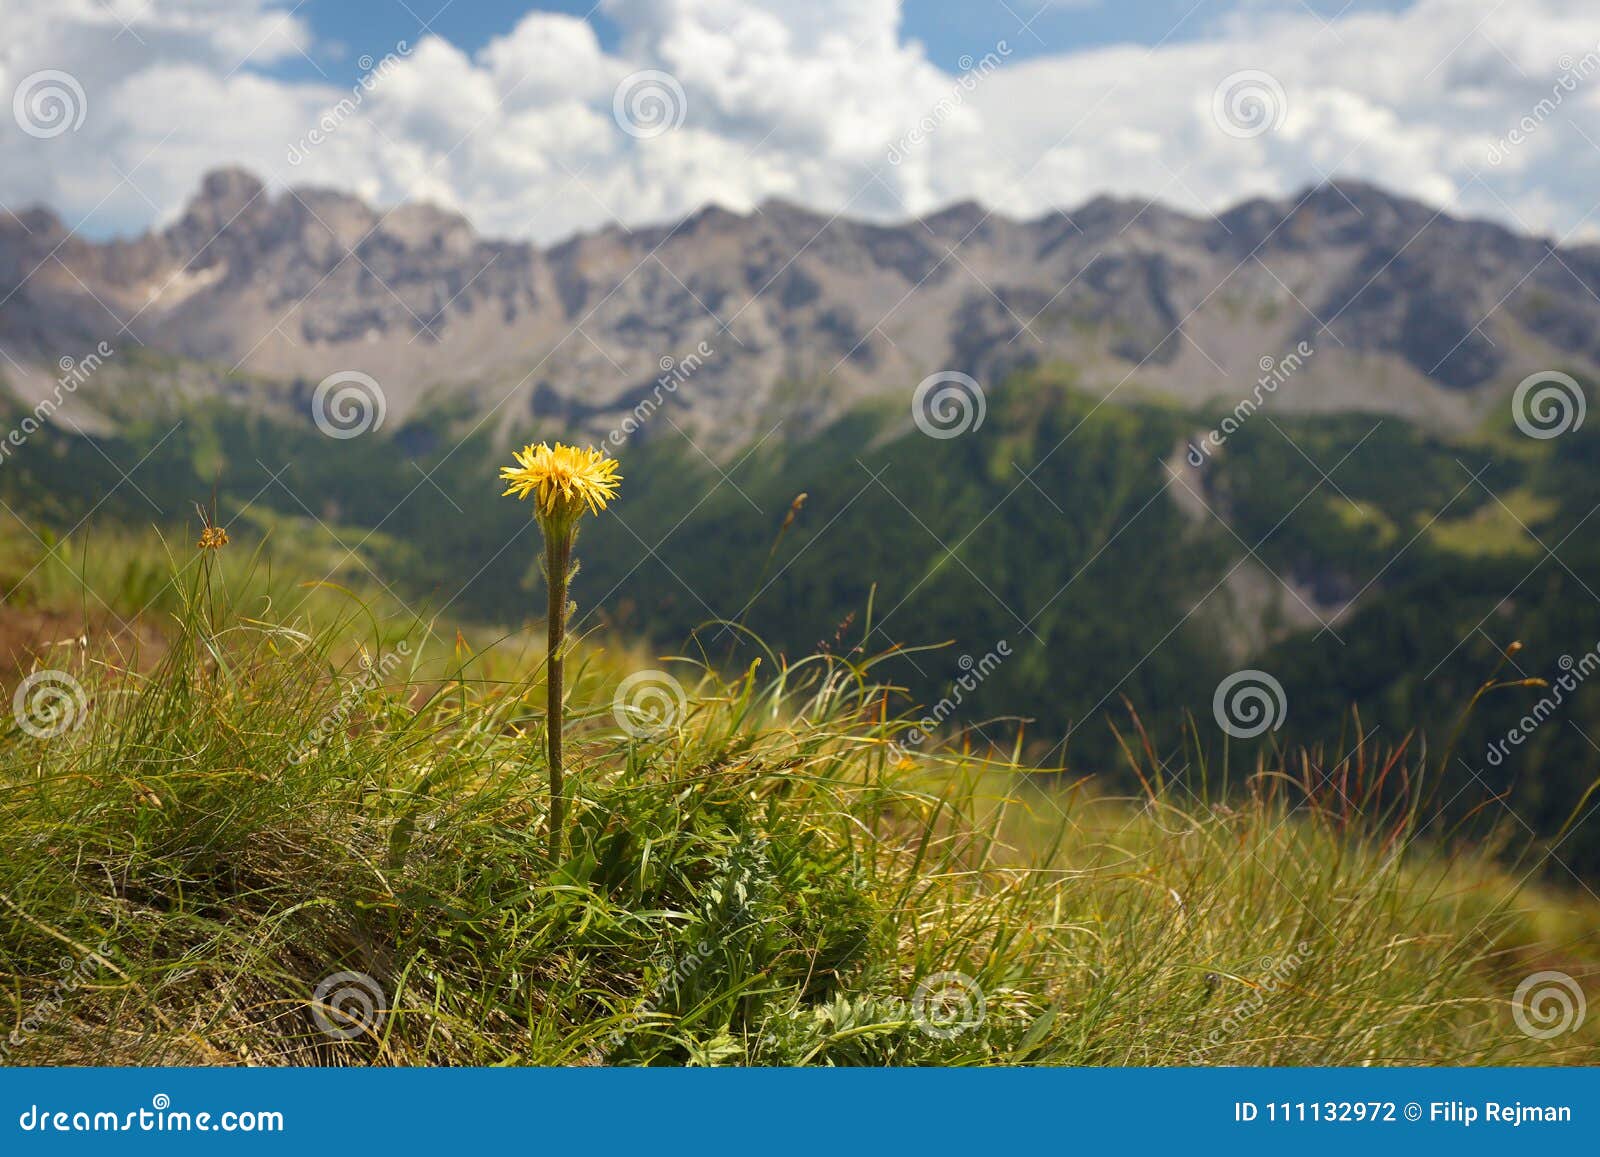 yellow coltsfood with mountains on the background